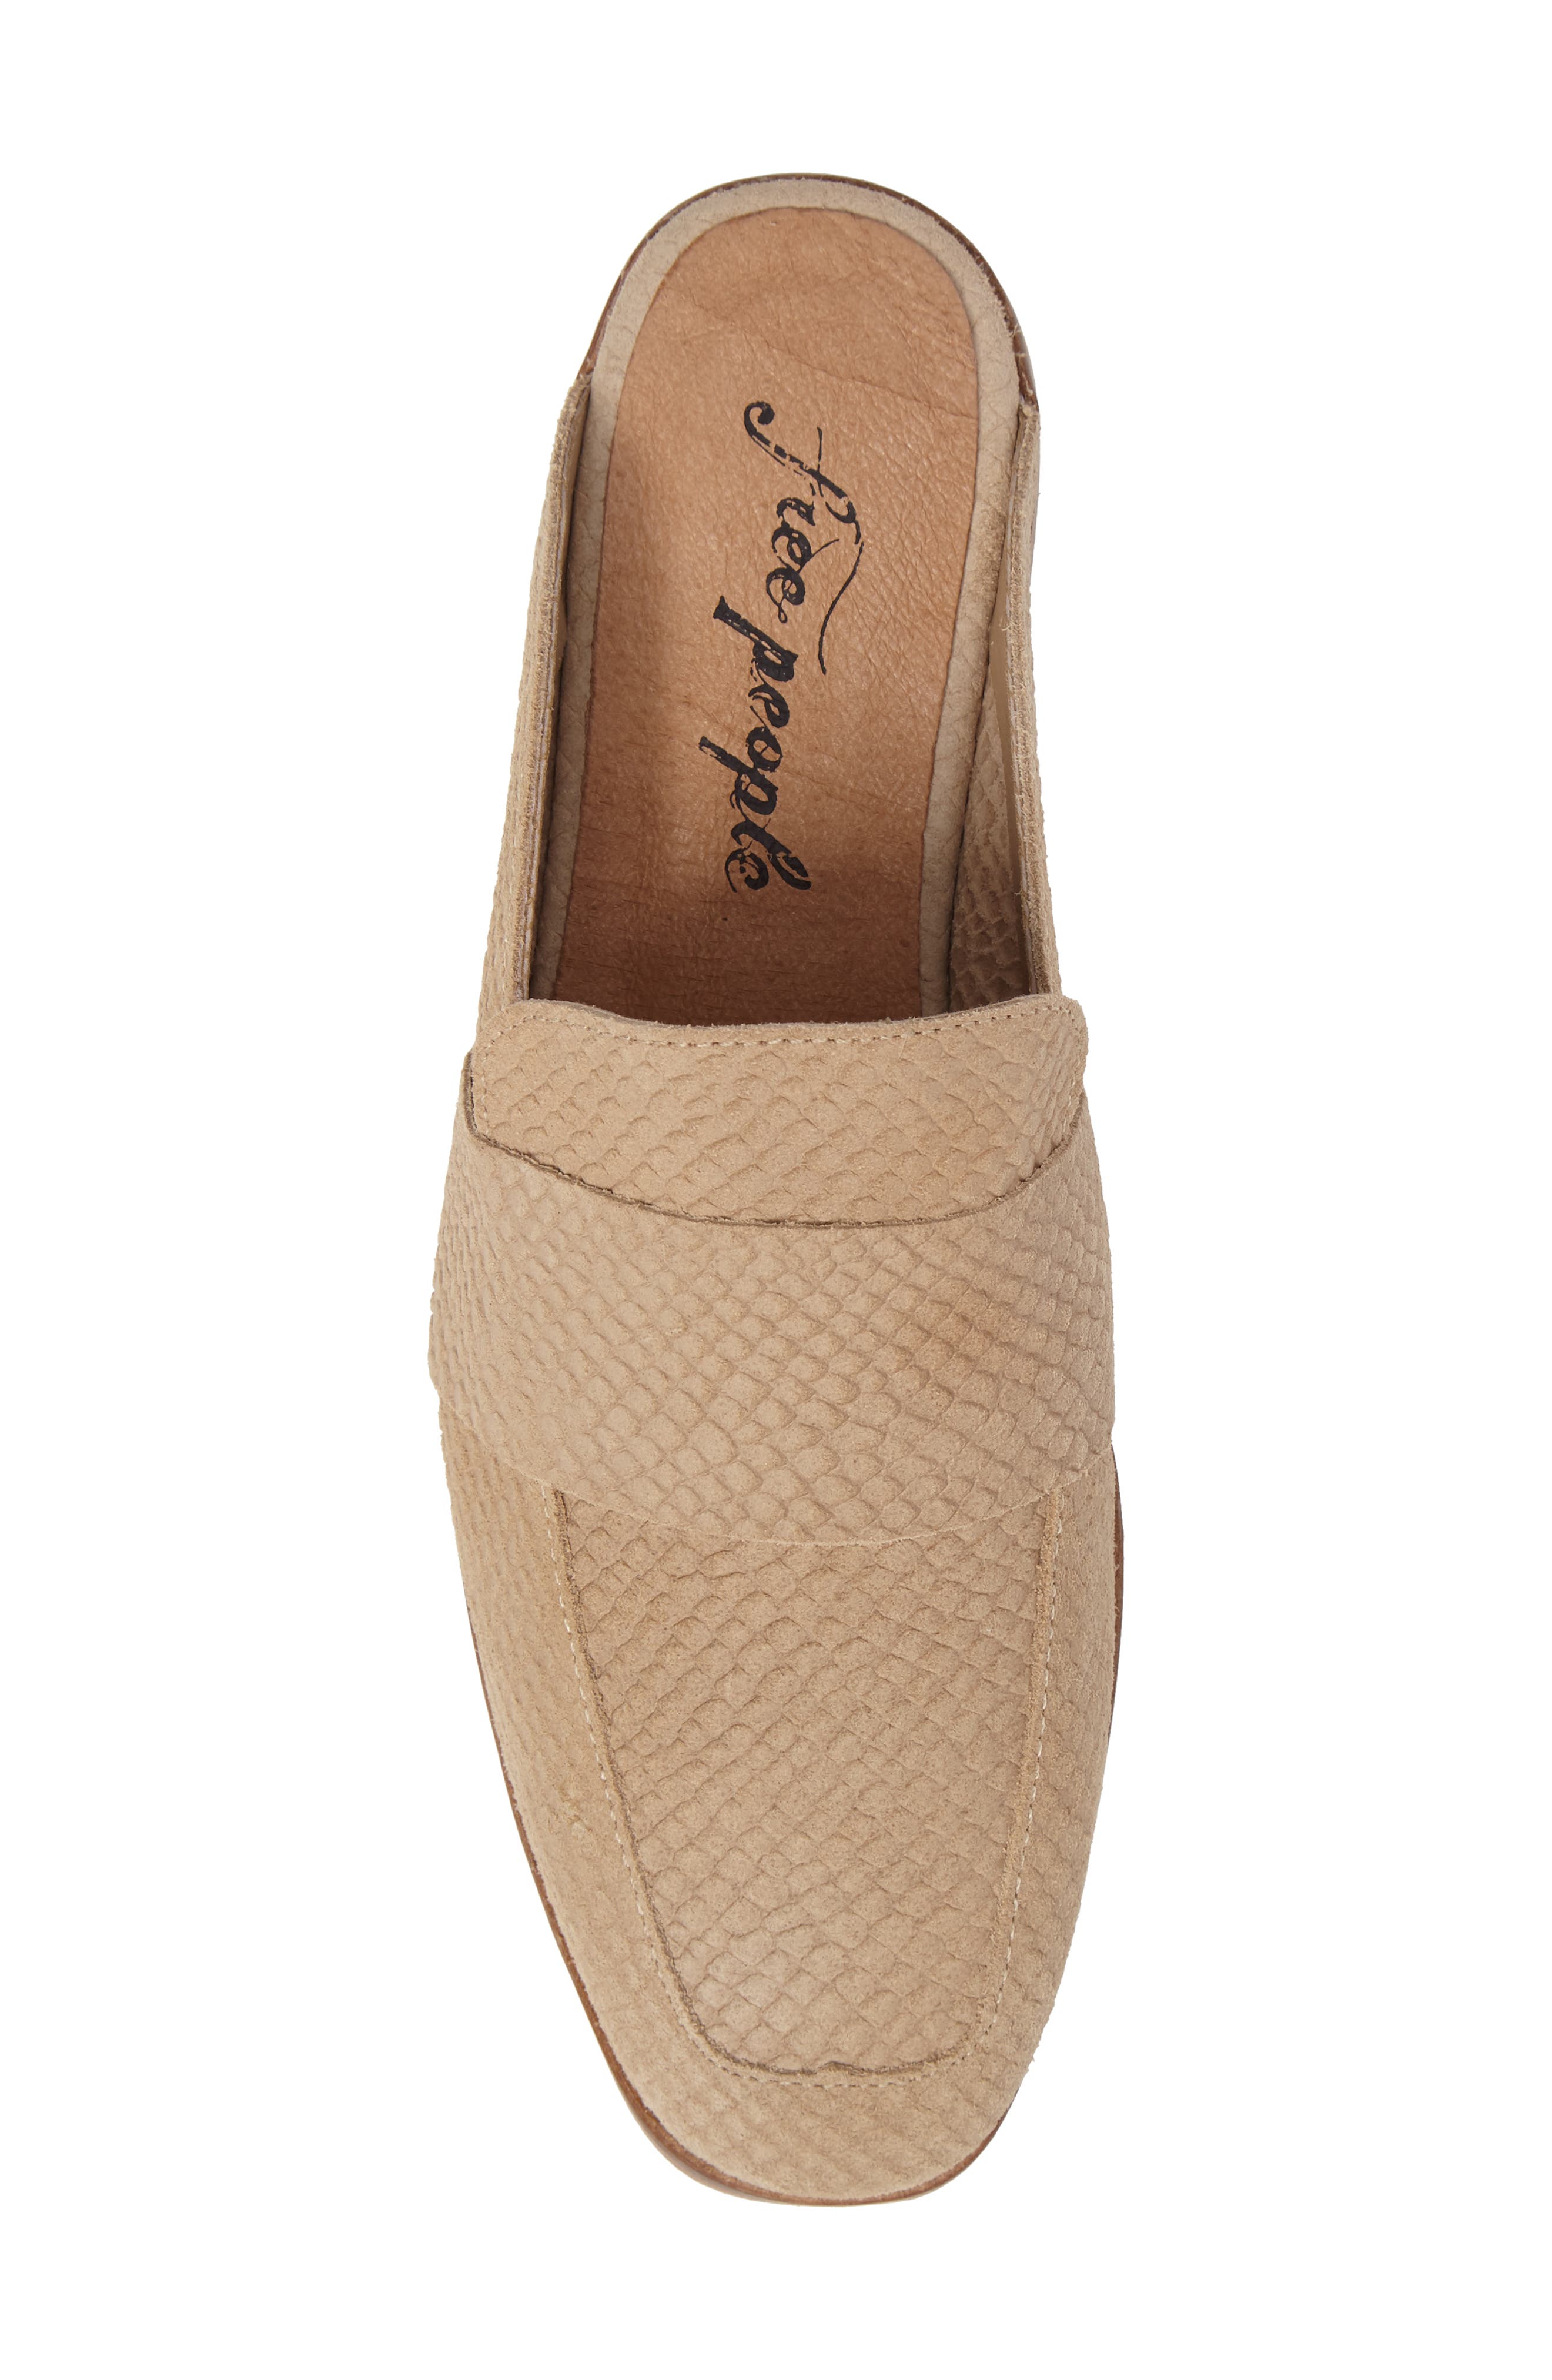 at ease loafer free people